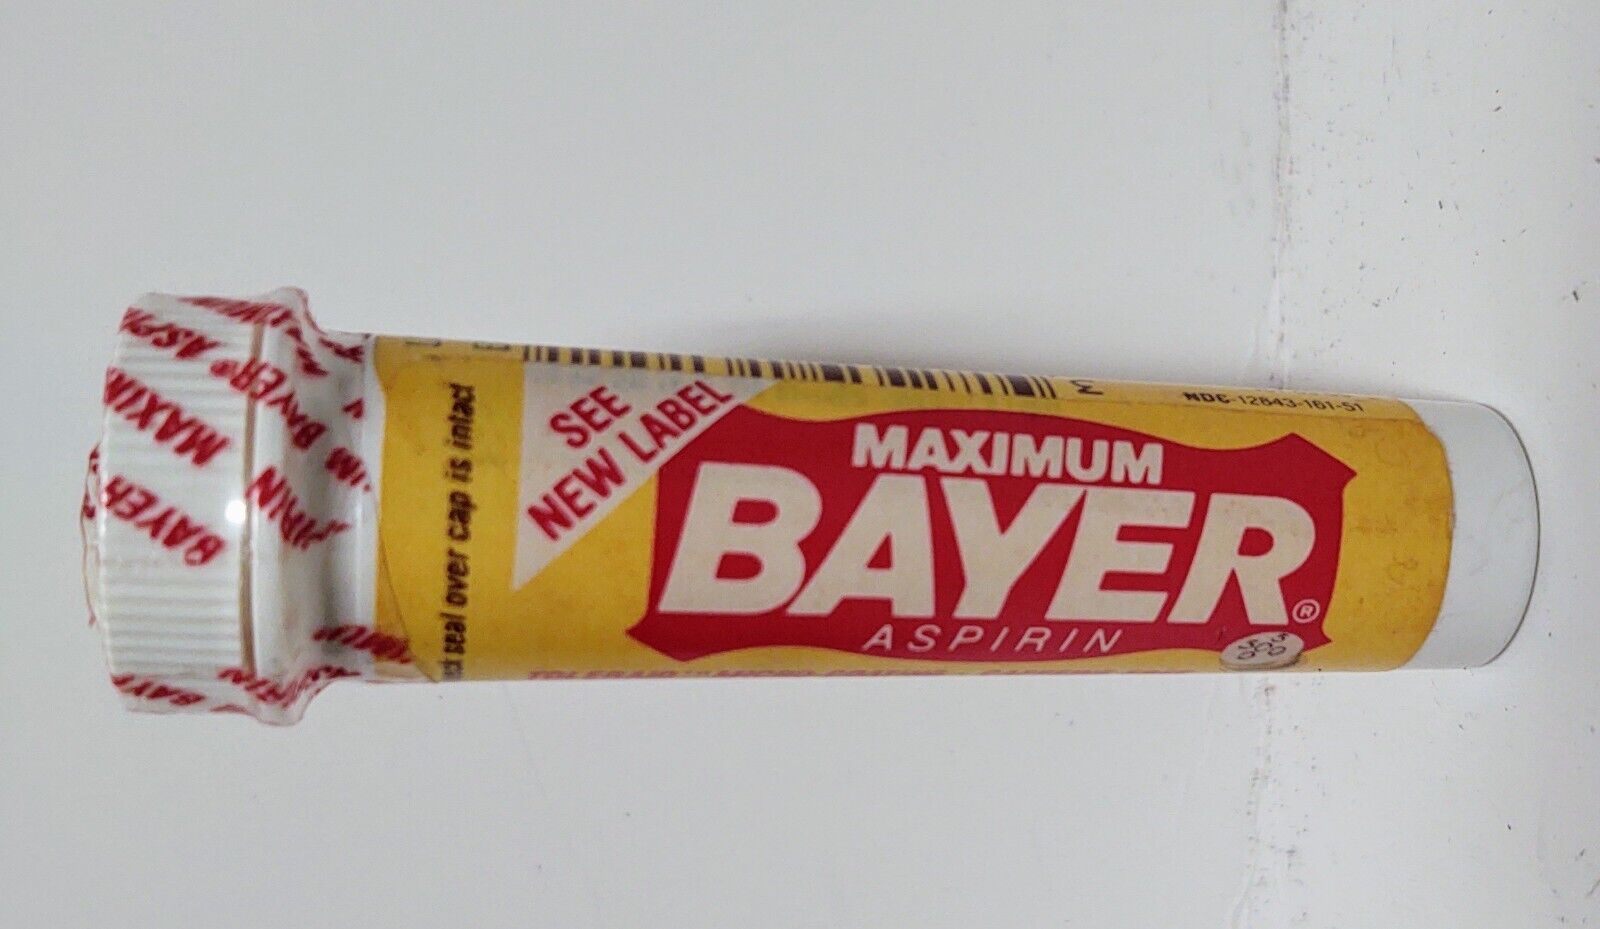 NEW 1987 Vintage Maximum Bayer Aspirin Micro Coating 10 tablets Tube Container